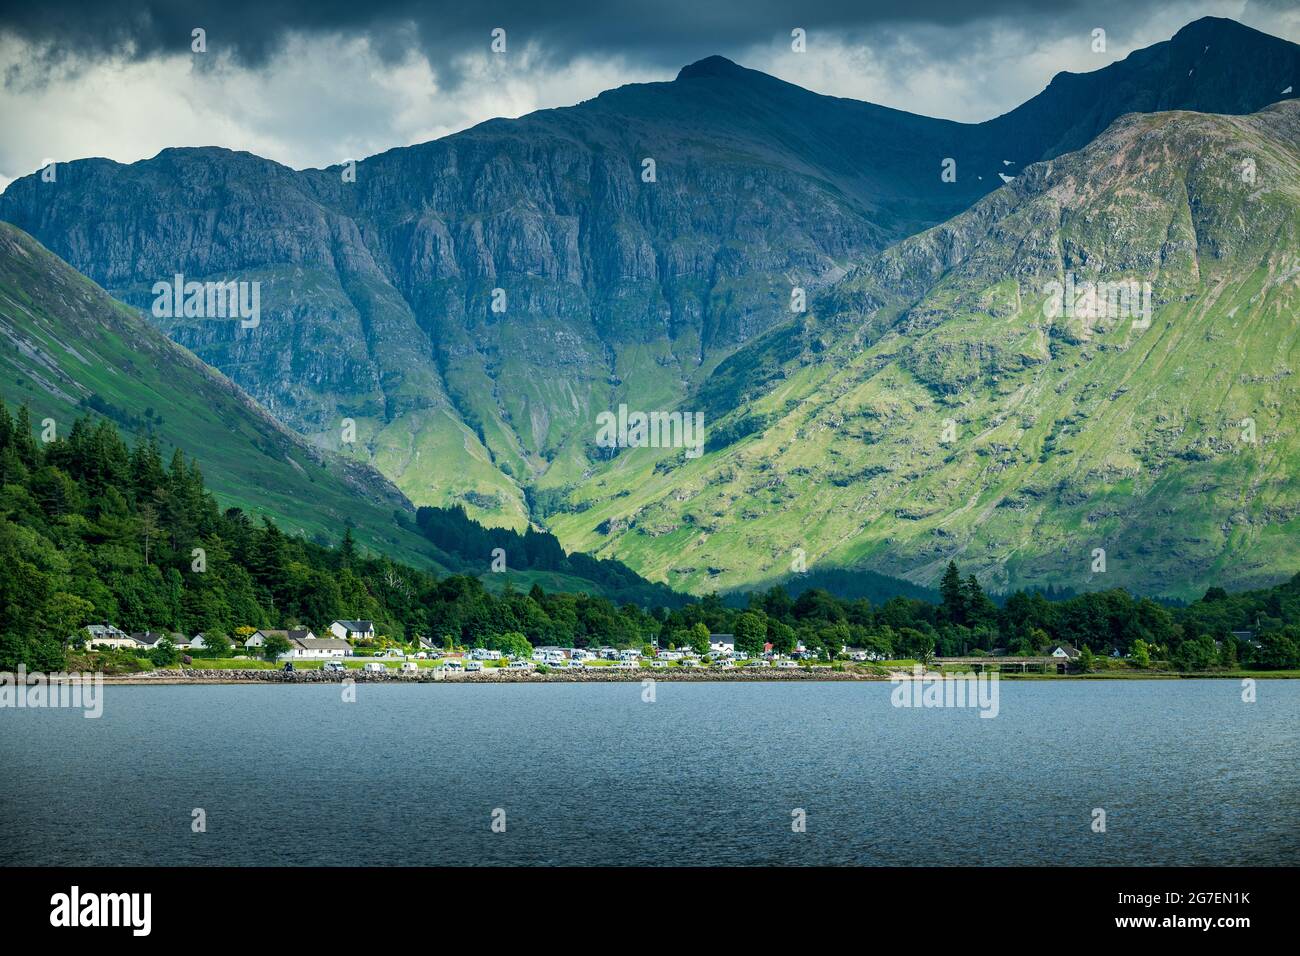 a large body of water with a mountain in the background at Glencoe Stock Photo